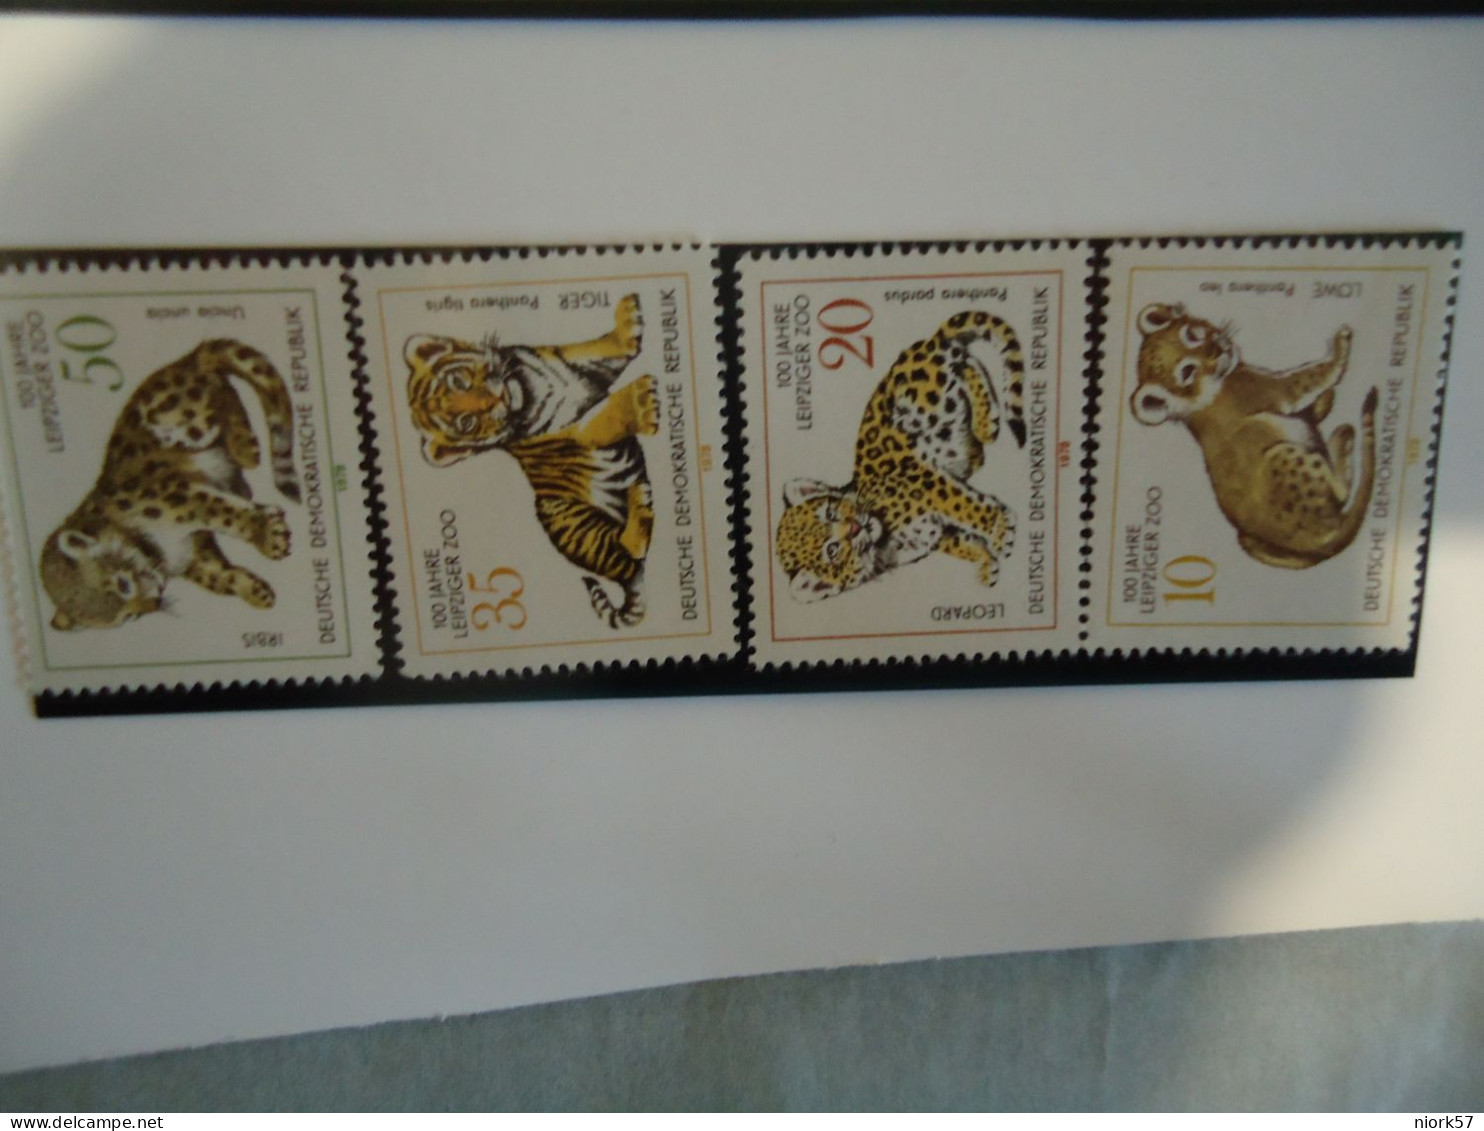 GERMANY   DDR   MNH STAMPS    ANIMALS  TIGER - Roofkatten